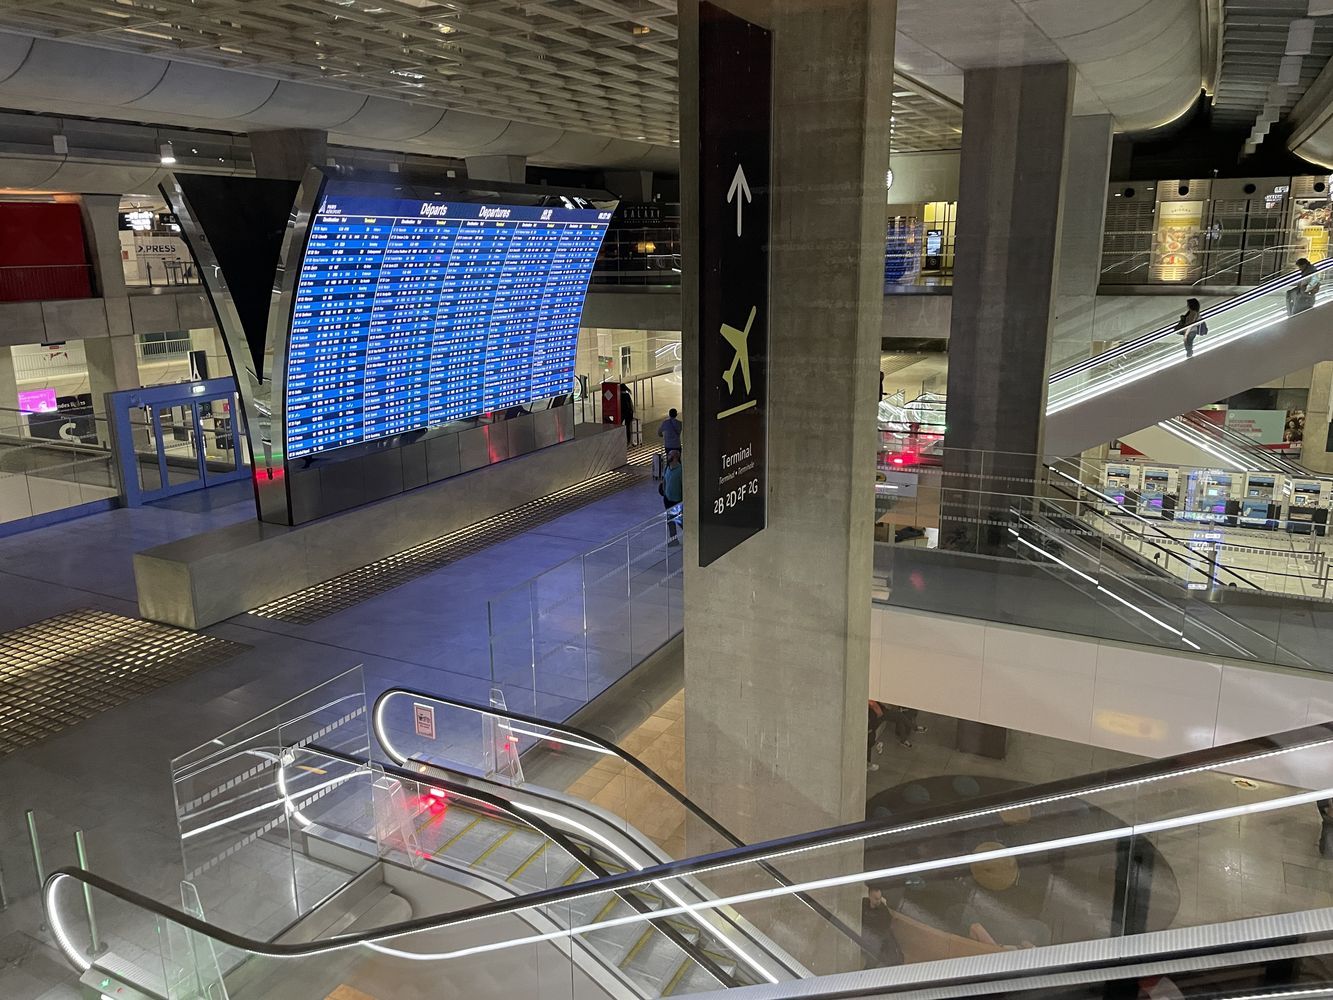 How to Find the Charles de Gaulle (CDG) Train Station